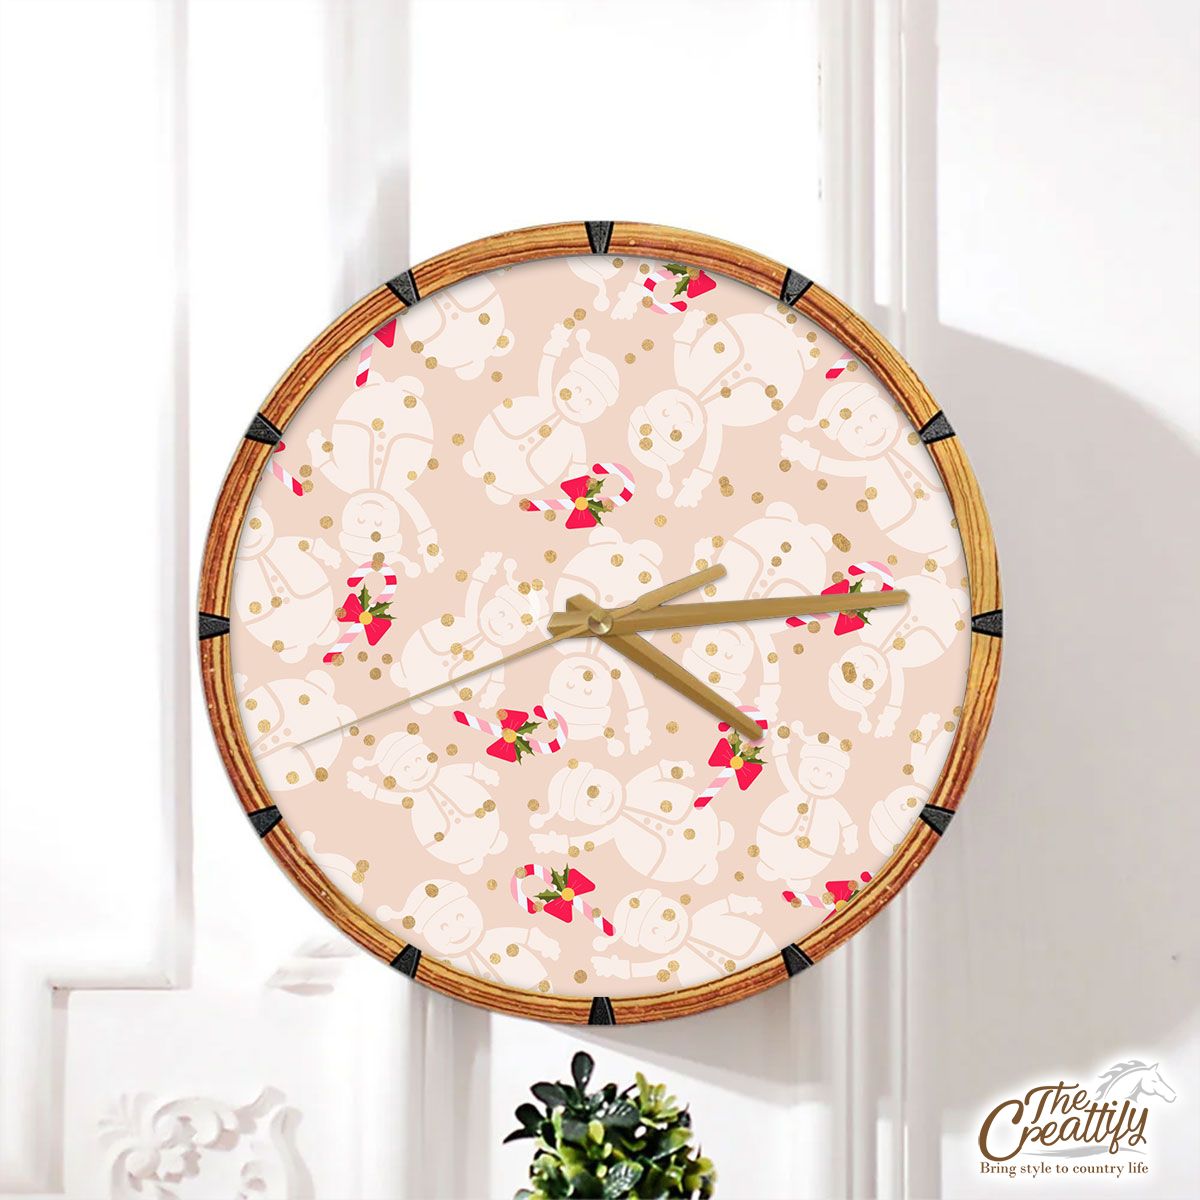 Snowman, Christmas Snowman With Candy Canes Wall Clock